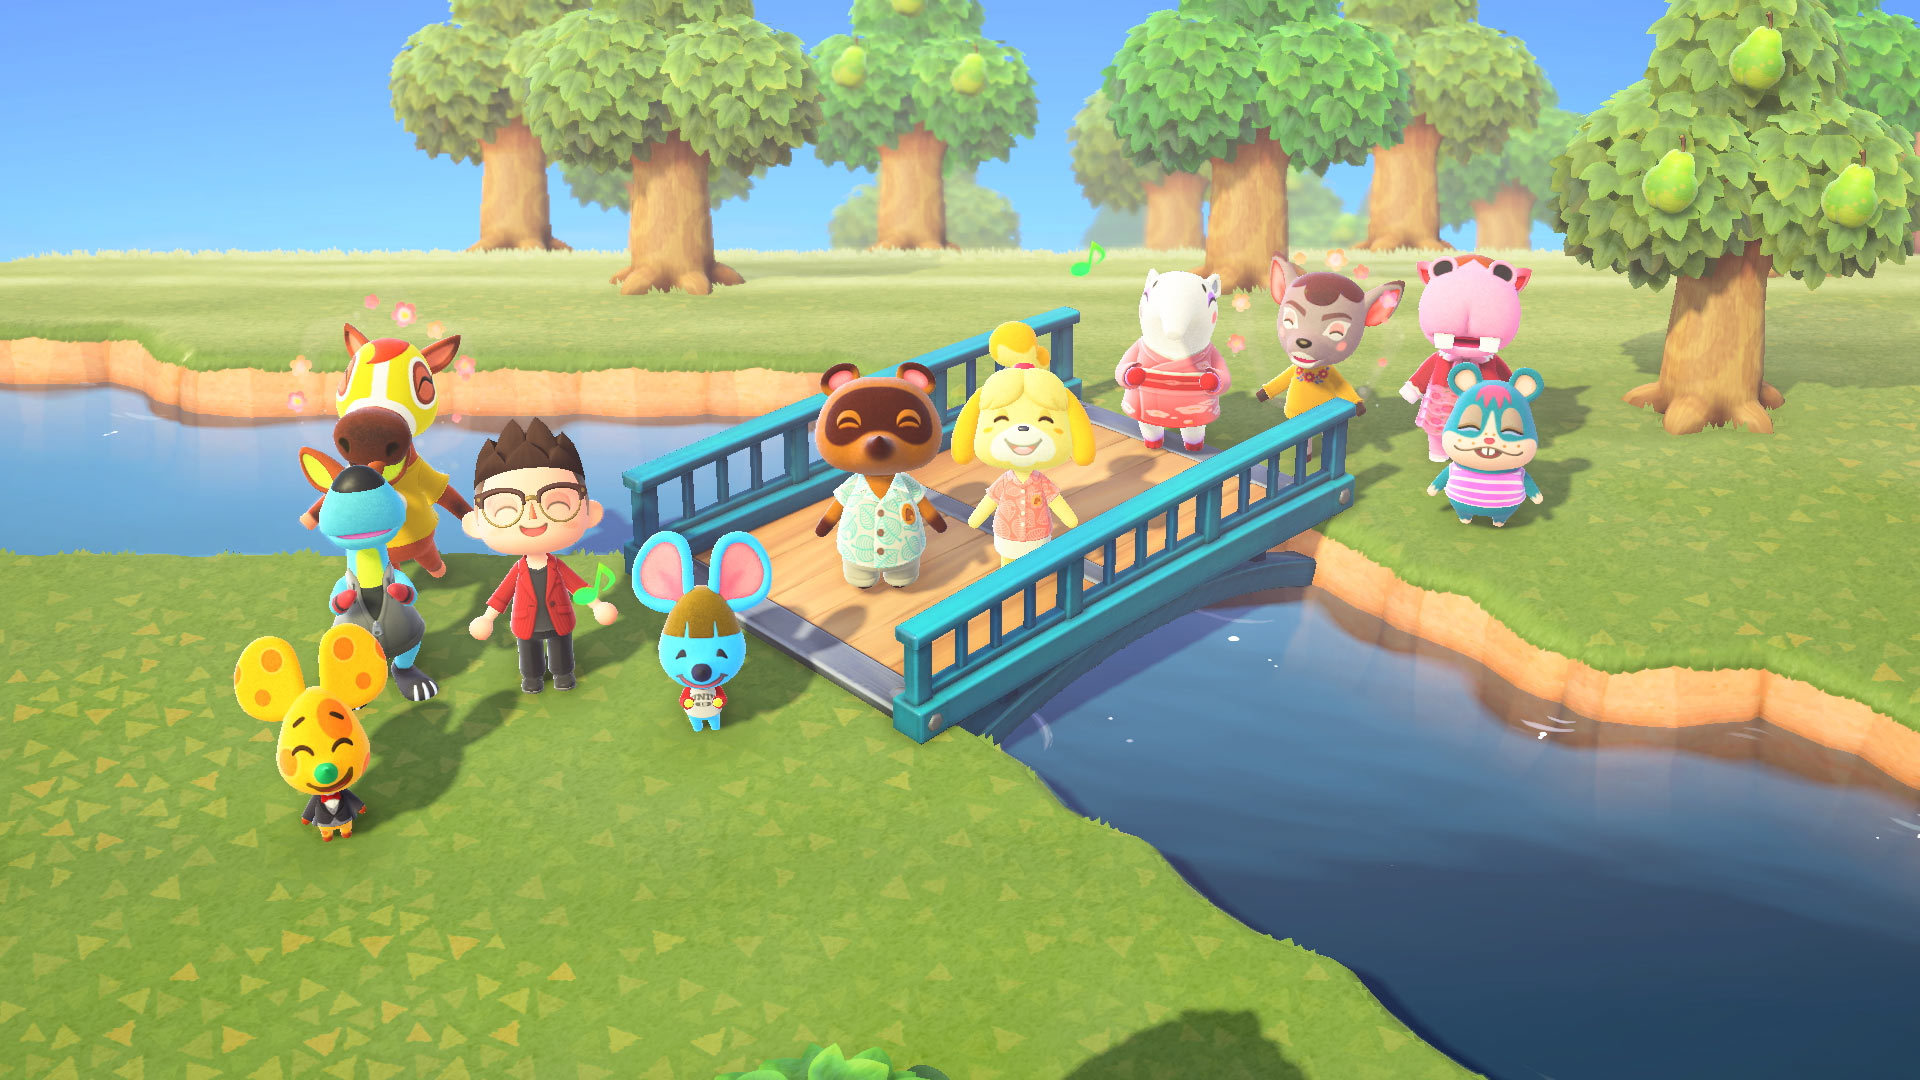 A screenshot from Animal Crossing: New Horizons